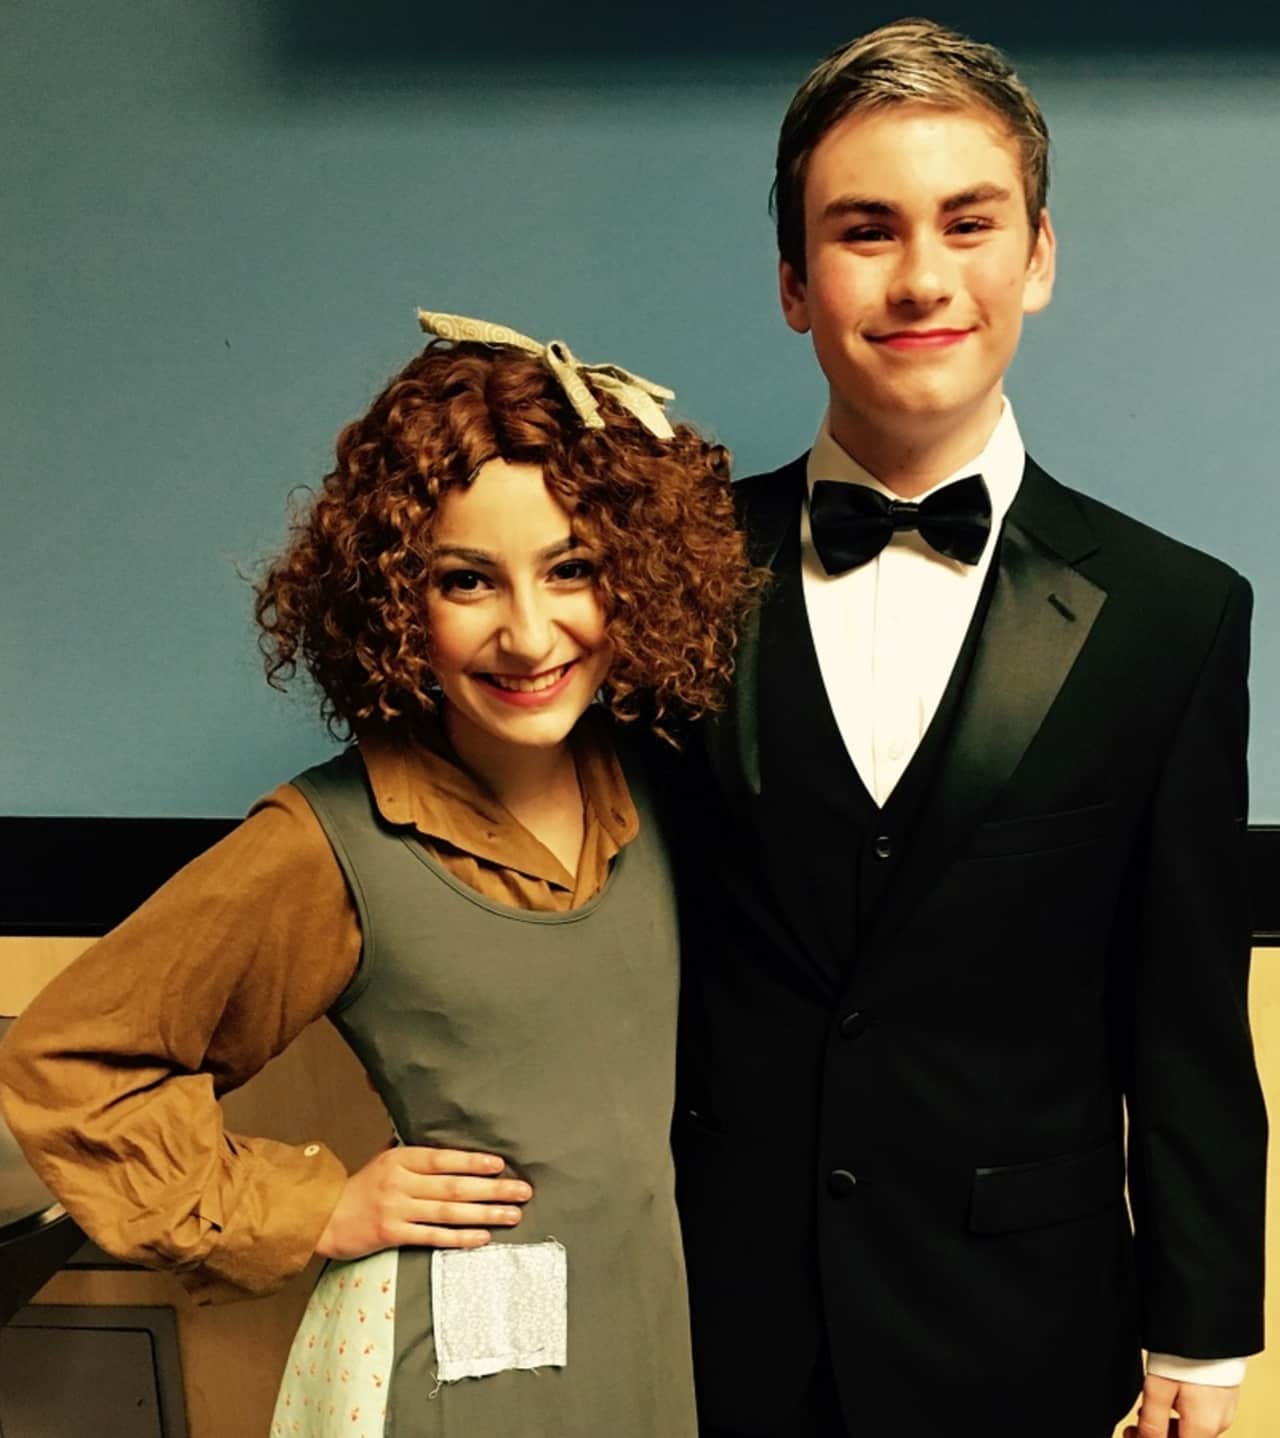 Nina Osso is Annie and Brendan O'Reilly is Oliver Warbucks. Both are attending Bergen Academies this fall (Nina the theater academy and Brendan the business academy).